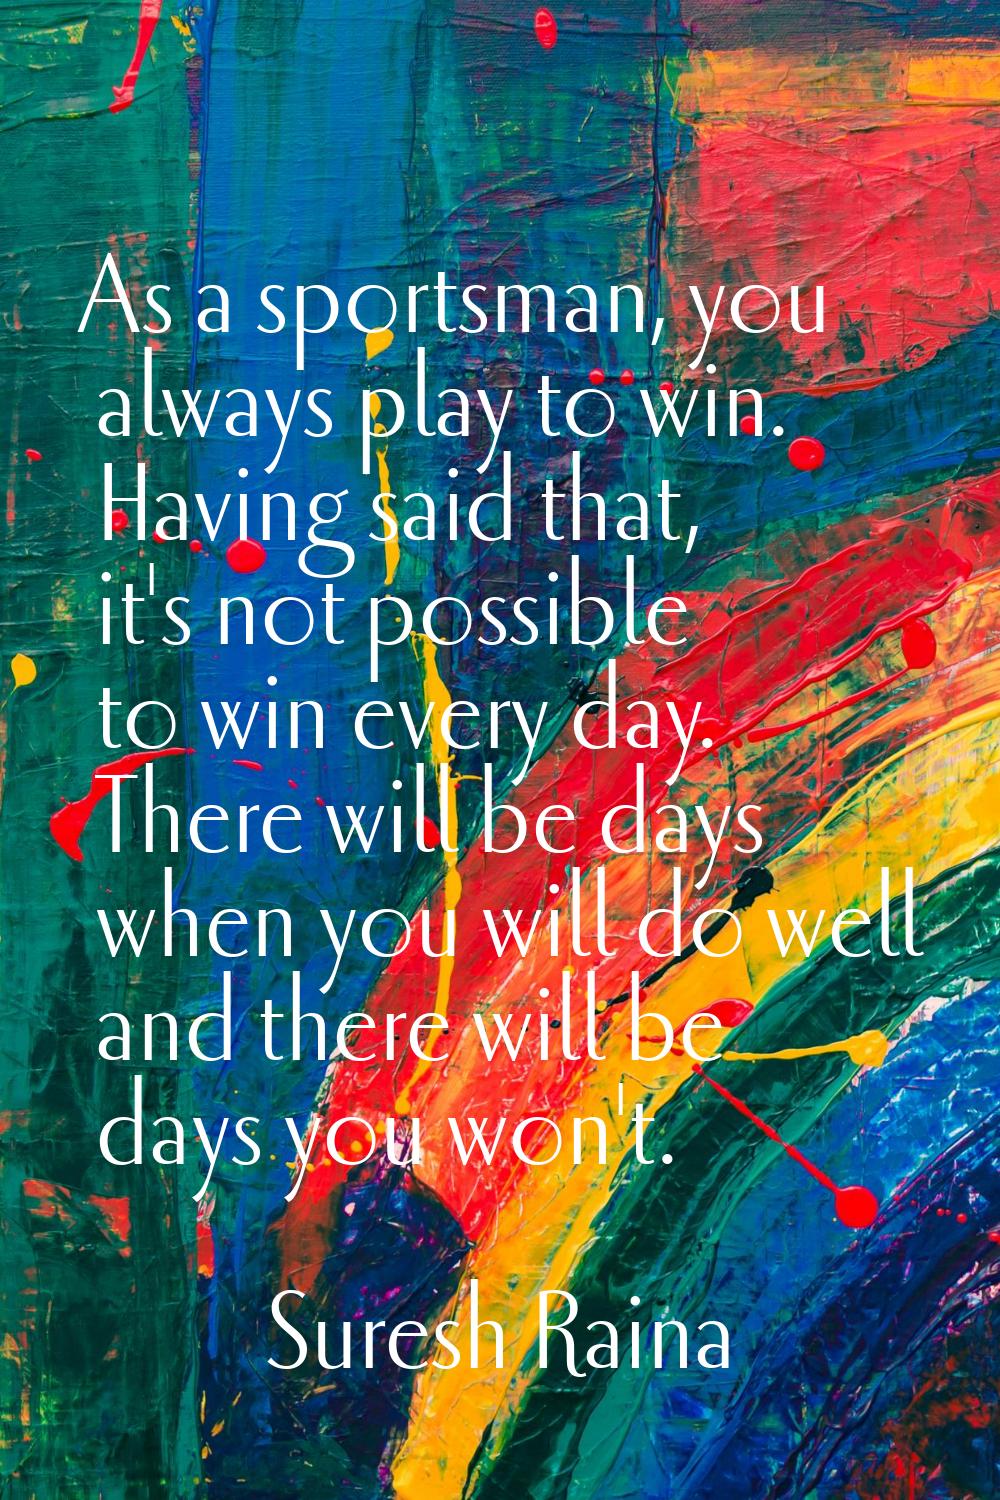 As a sportsman, you always play to win. Having said that, it's not possible to win every day. There